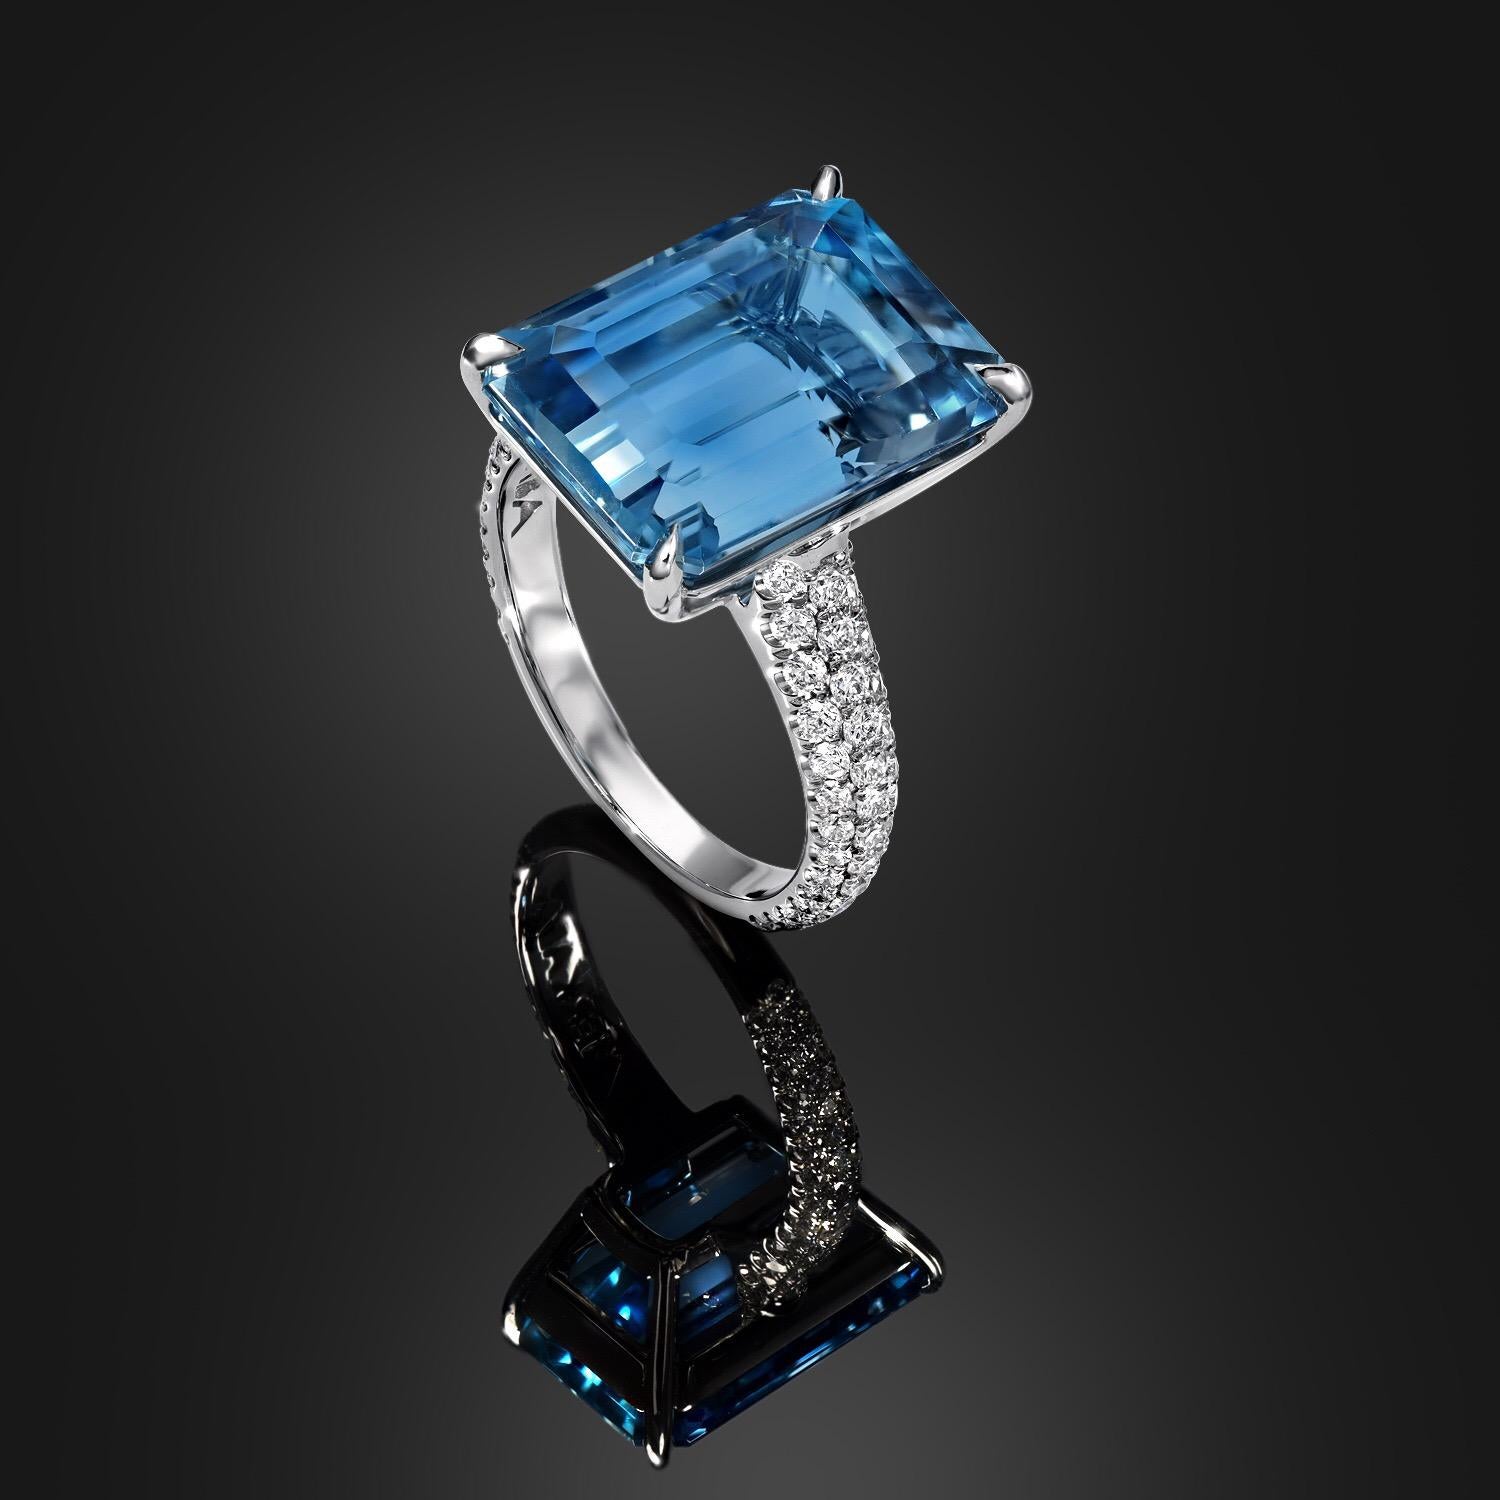 Vivid blue Aquamarine emerald cut, weighing a total of 9.59 carats, hand set in a magnificent platinum ring, adorned by a total of 0.88 carats total of round brilliant diamonds, set in a three row shank.
Aquamarines of this color, cut and clarity